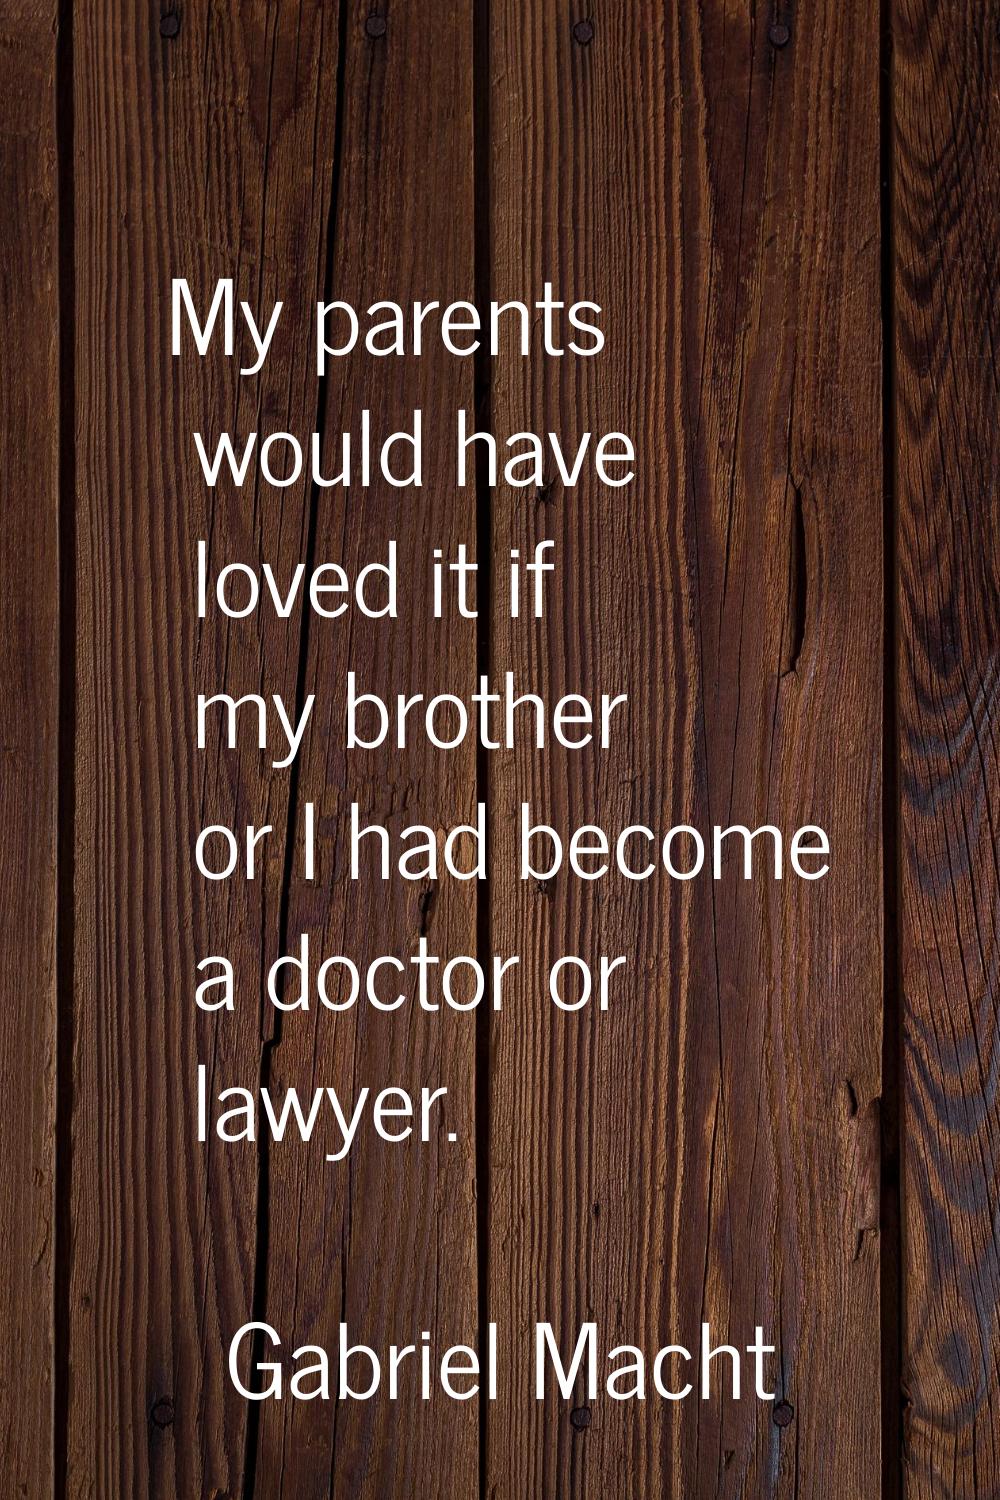 My parents would have loved it if my brother or I had become a doctor or lawyer.